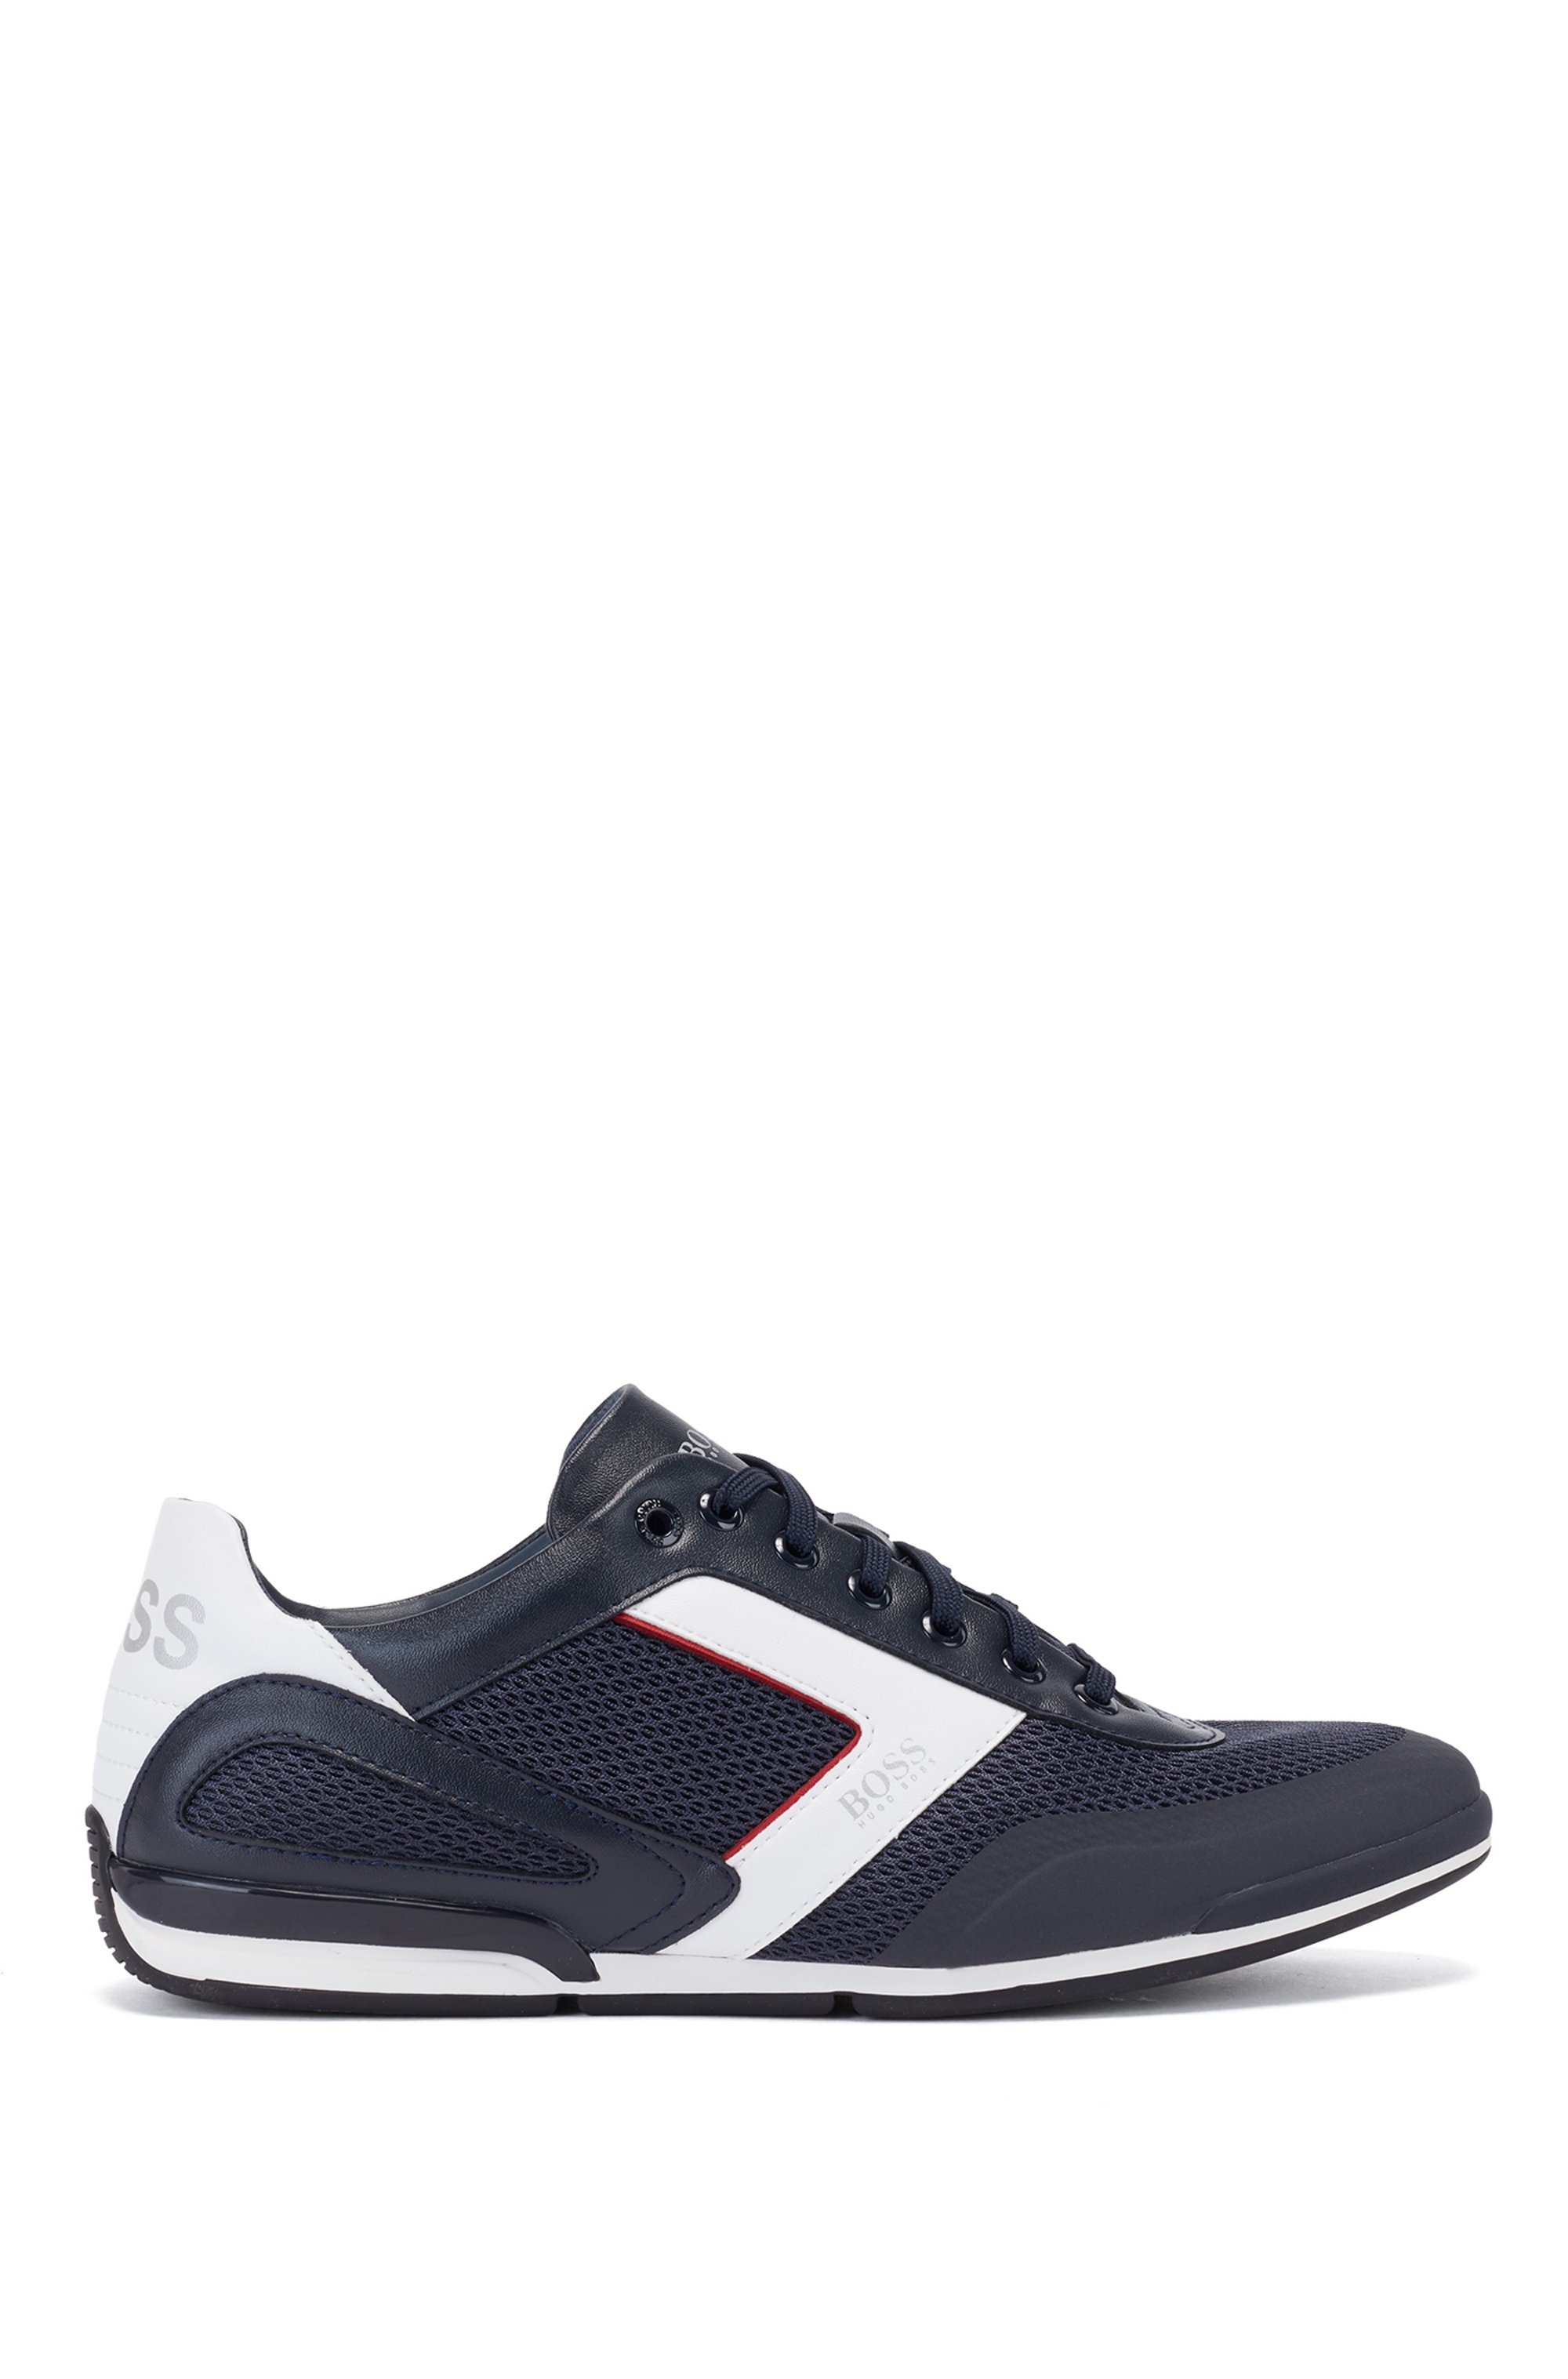 Hybrid trainers with reflective details and backtab logo, Dark Blue